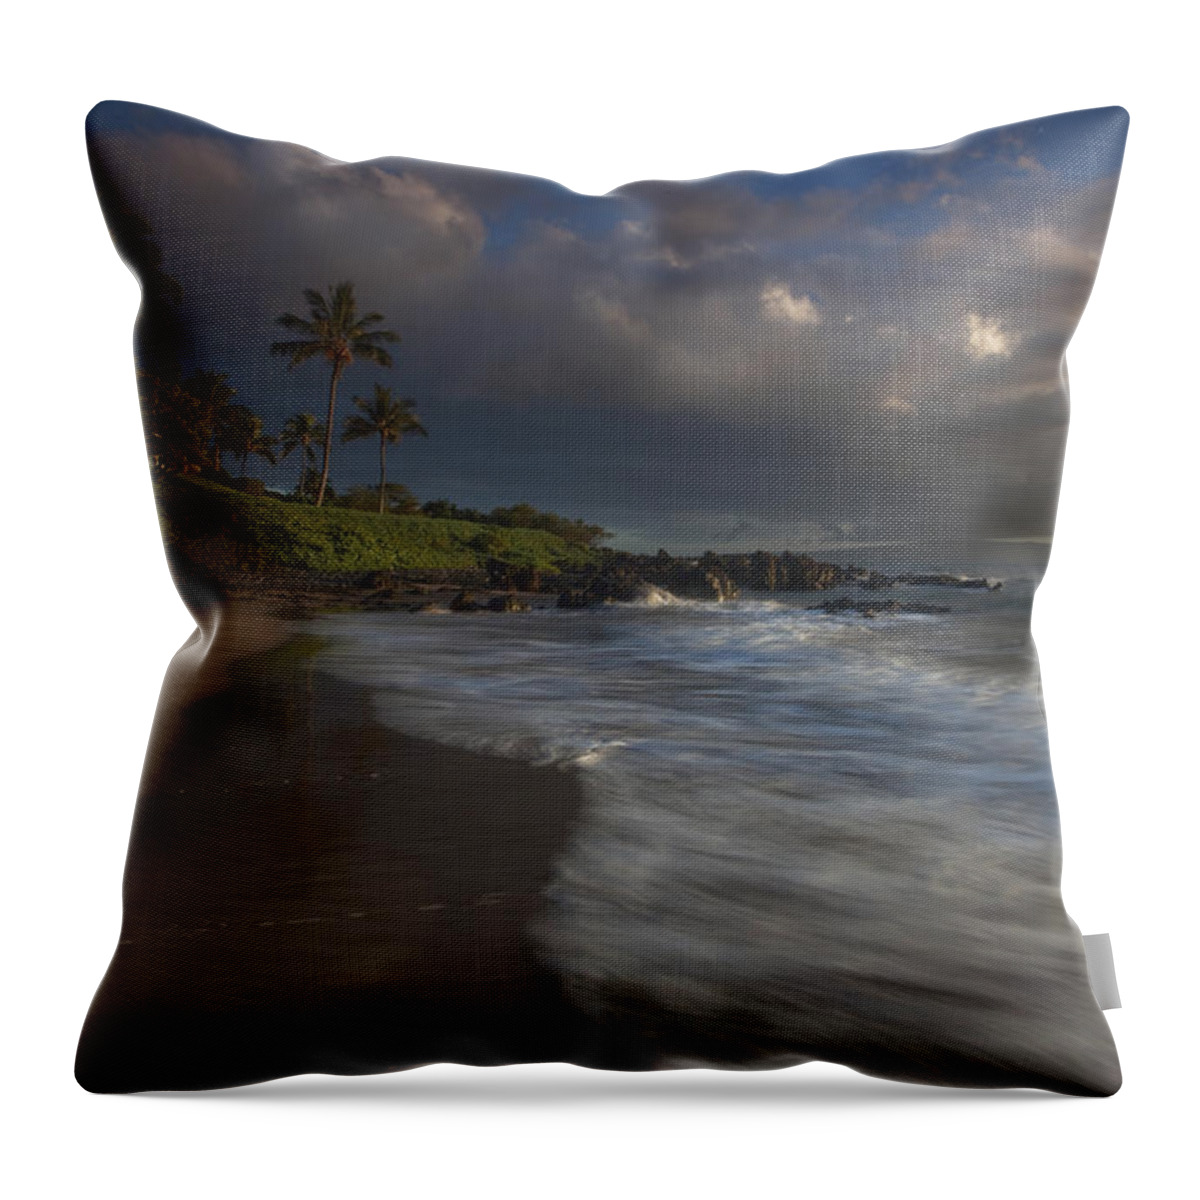 Seascape Maui Hawaii Shorebreak Palmtrees Ebb N Flow Clouds Throw Pillow featuring the photograph Evening Falls #1 by James Roemmling